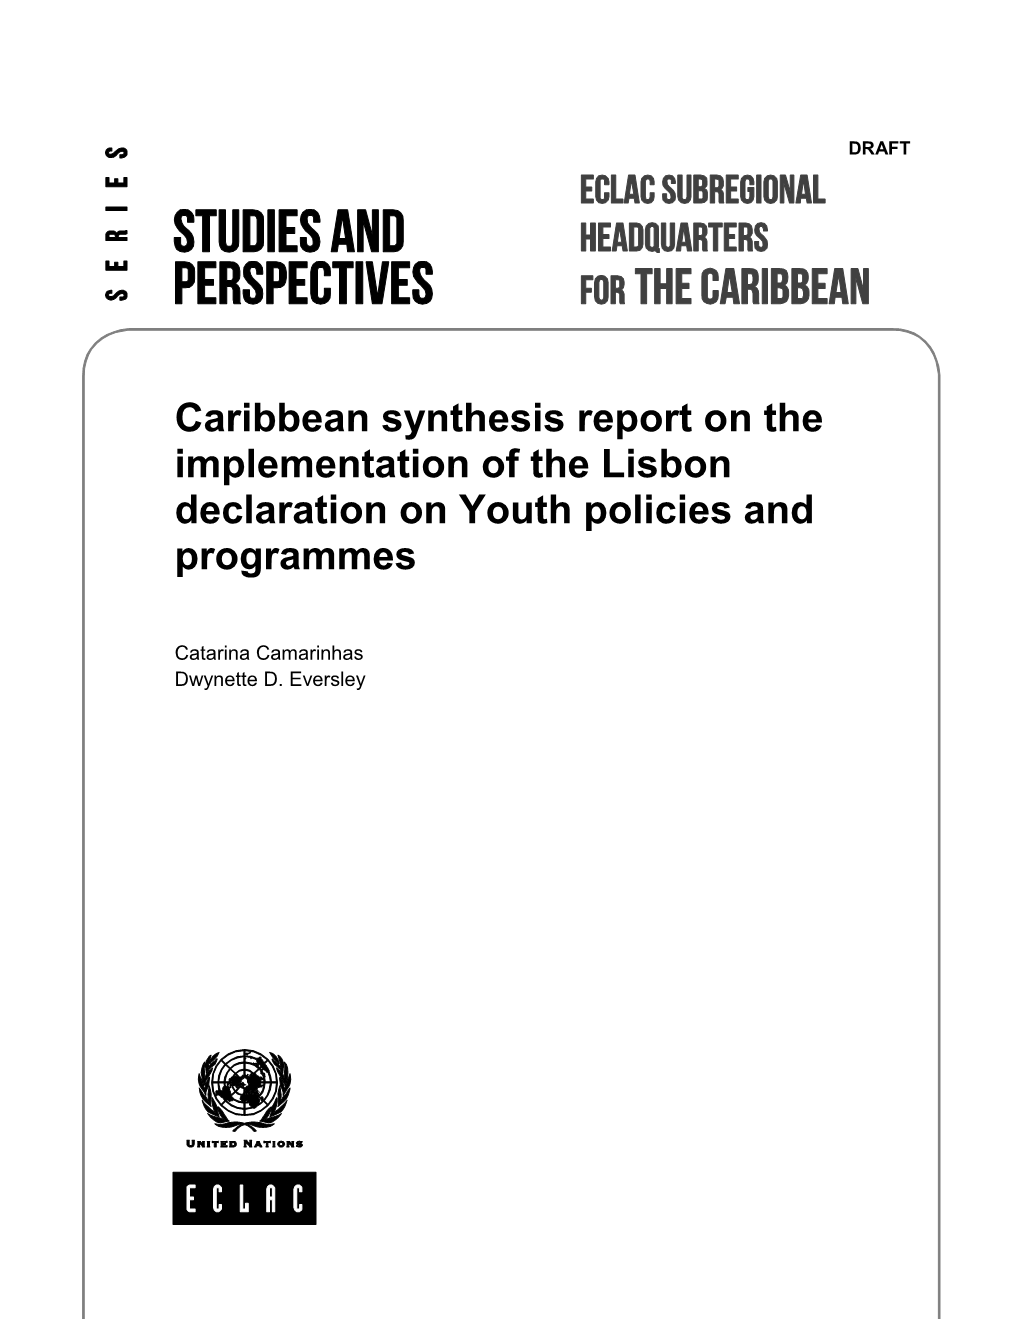 Caribbean Synthesis Report on the Implementation of the Lisbon Declaration on Youth Policies and Programmes